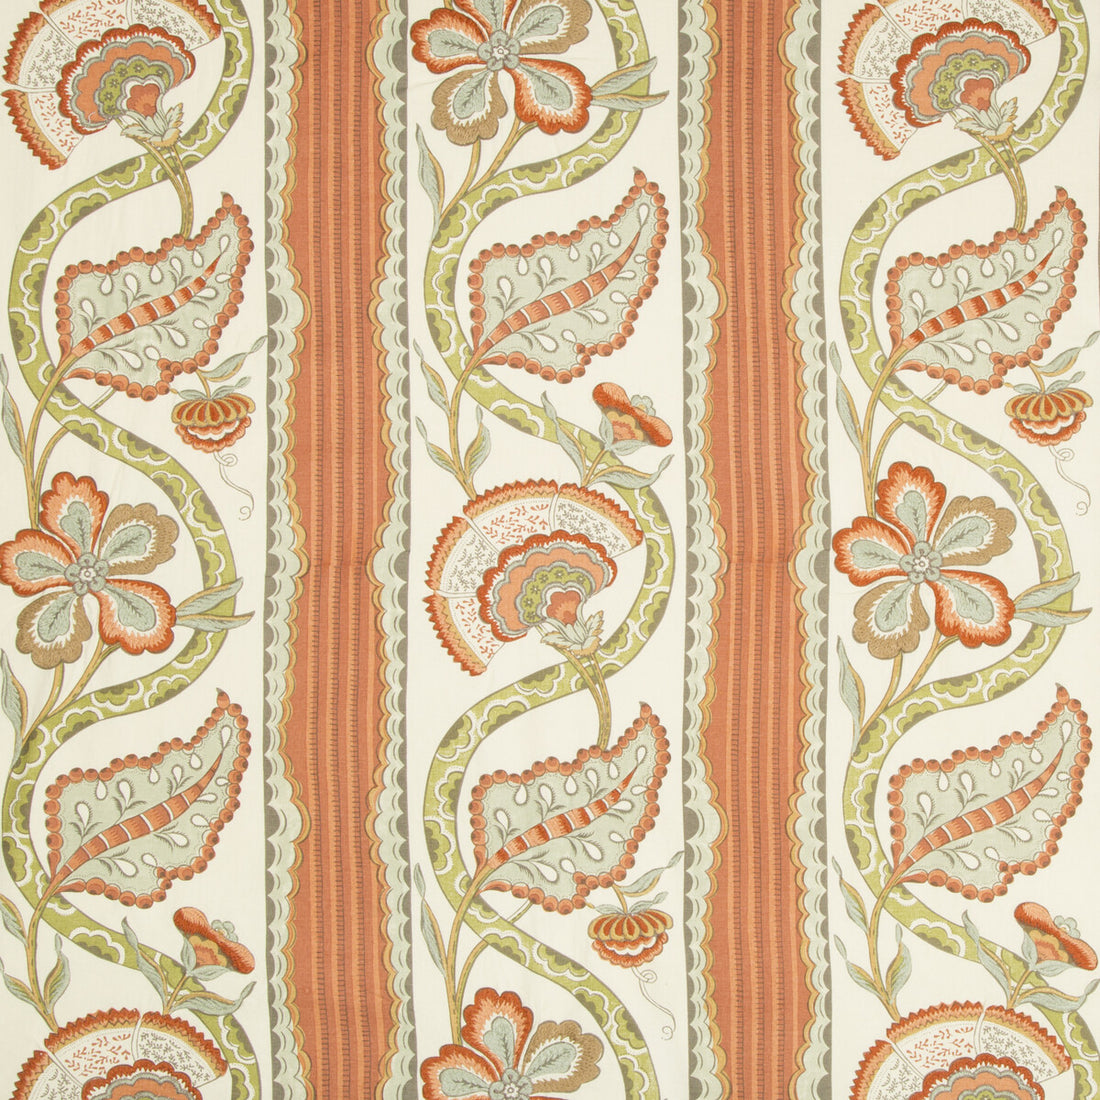 Gautier Print fabric in pumpkin color - pattern 8017113.124.0 - by Brunschwig &amp; Fils in the Le Parnasse collection